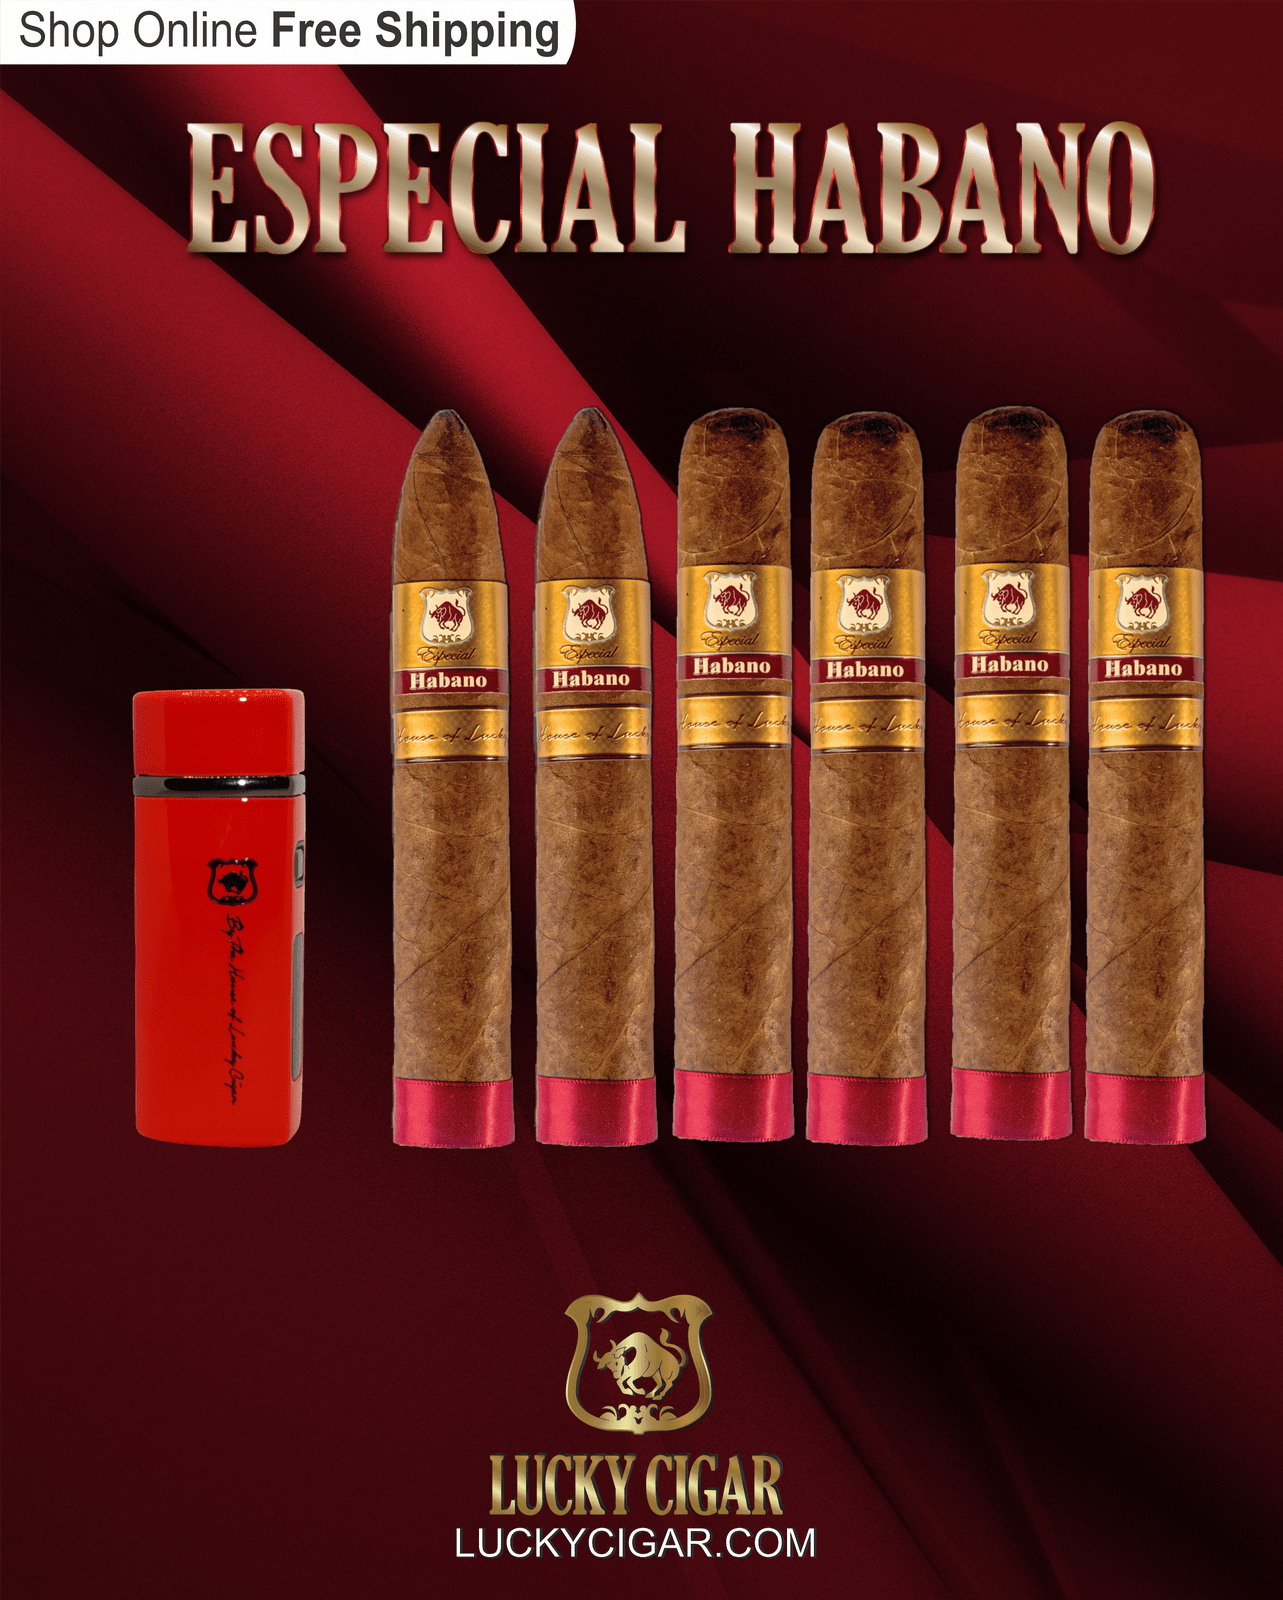 Habano Cigars: Especial Habano by Lucky Cigar: Set of 6 Cigars 4 Toro and 2 Torpedo with Torch Lighter